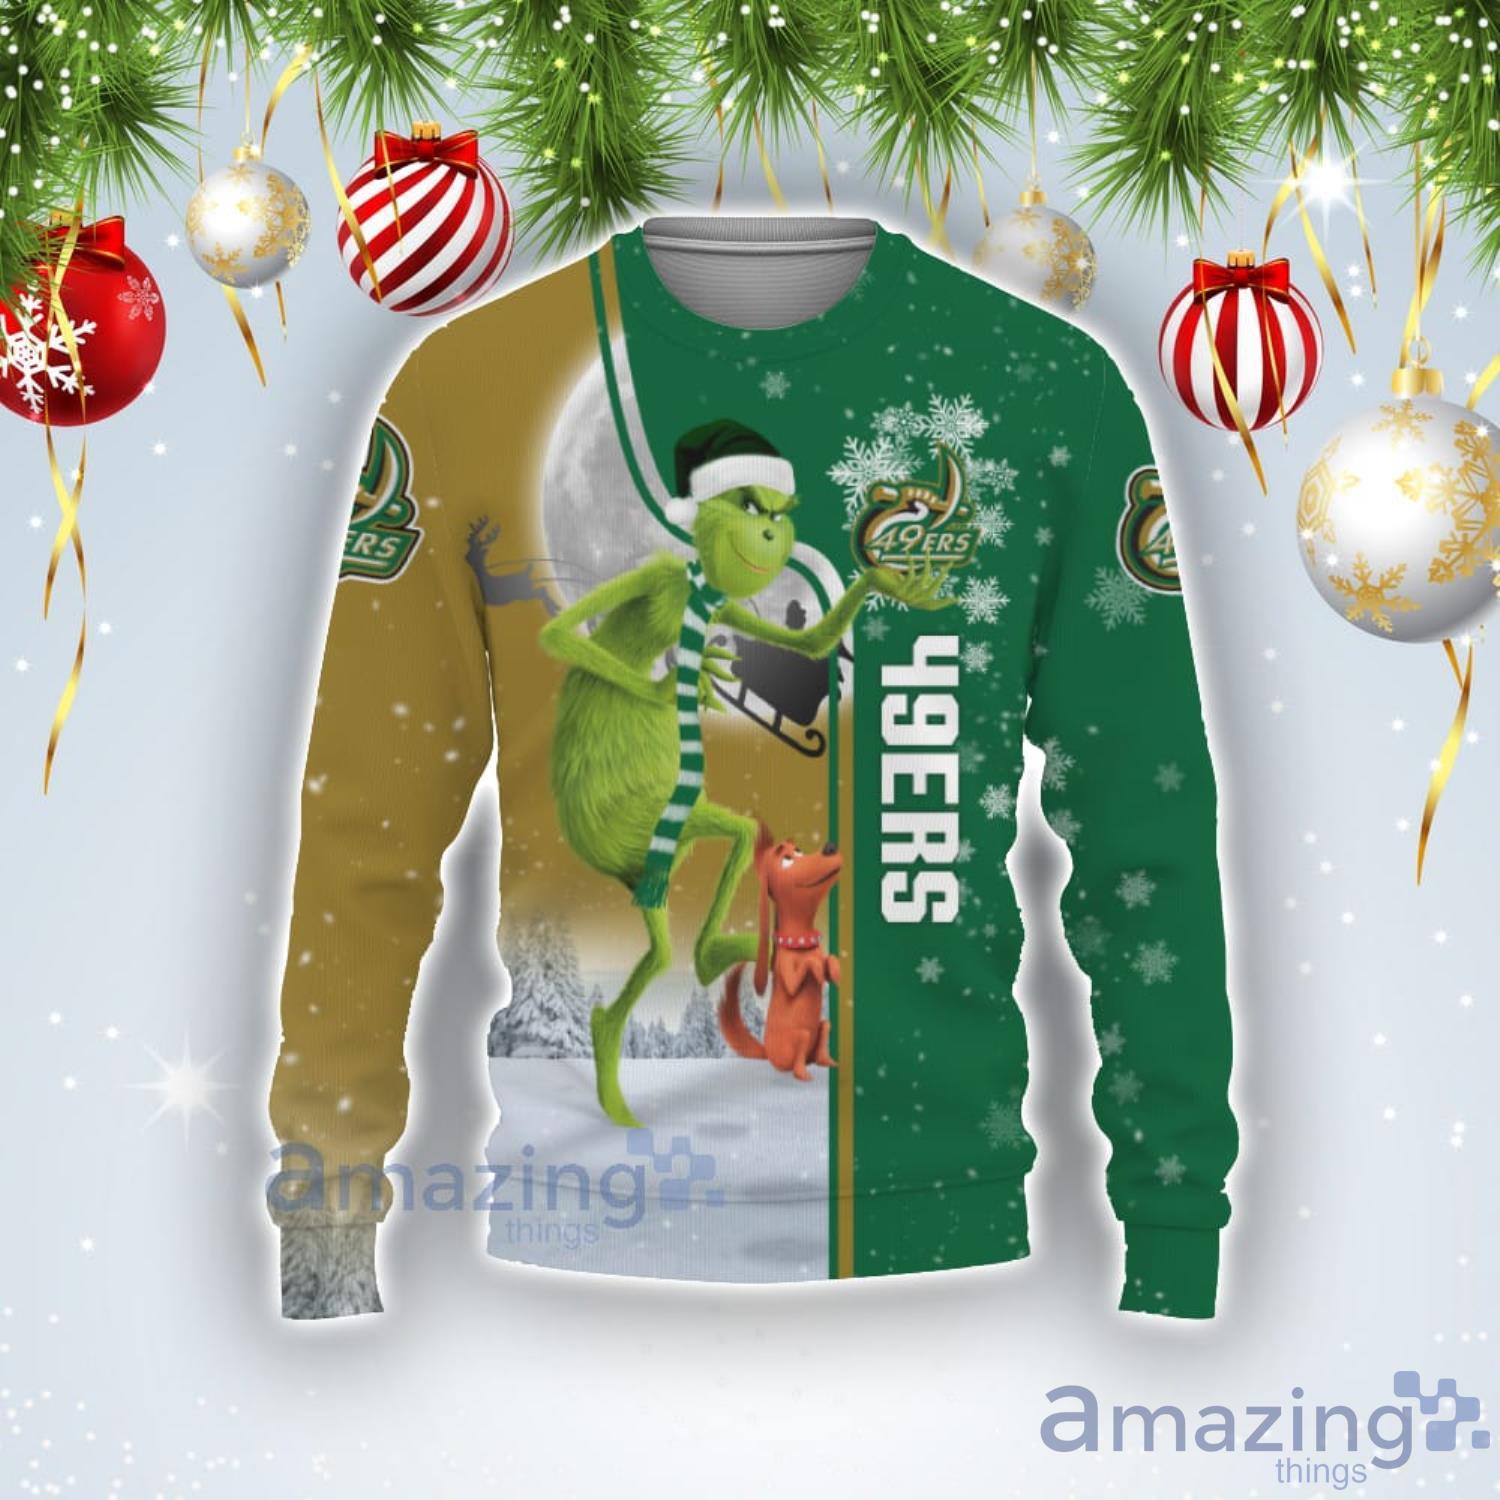 Charlotte 49ers Funny Grinch Ugly Christmas Sweater Product Photo 1